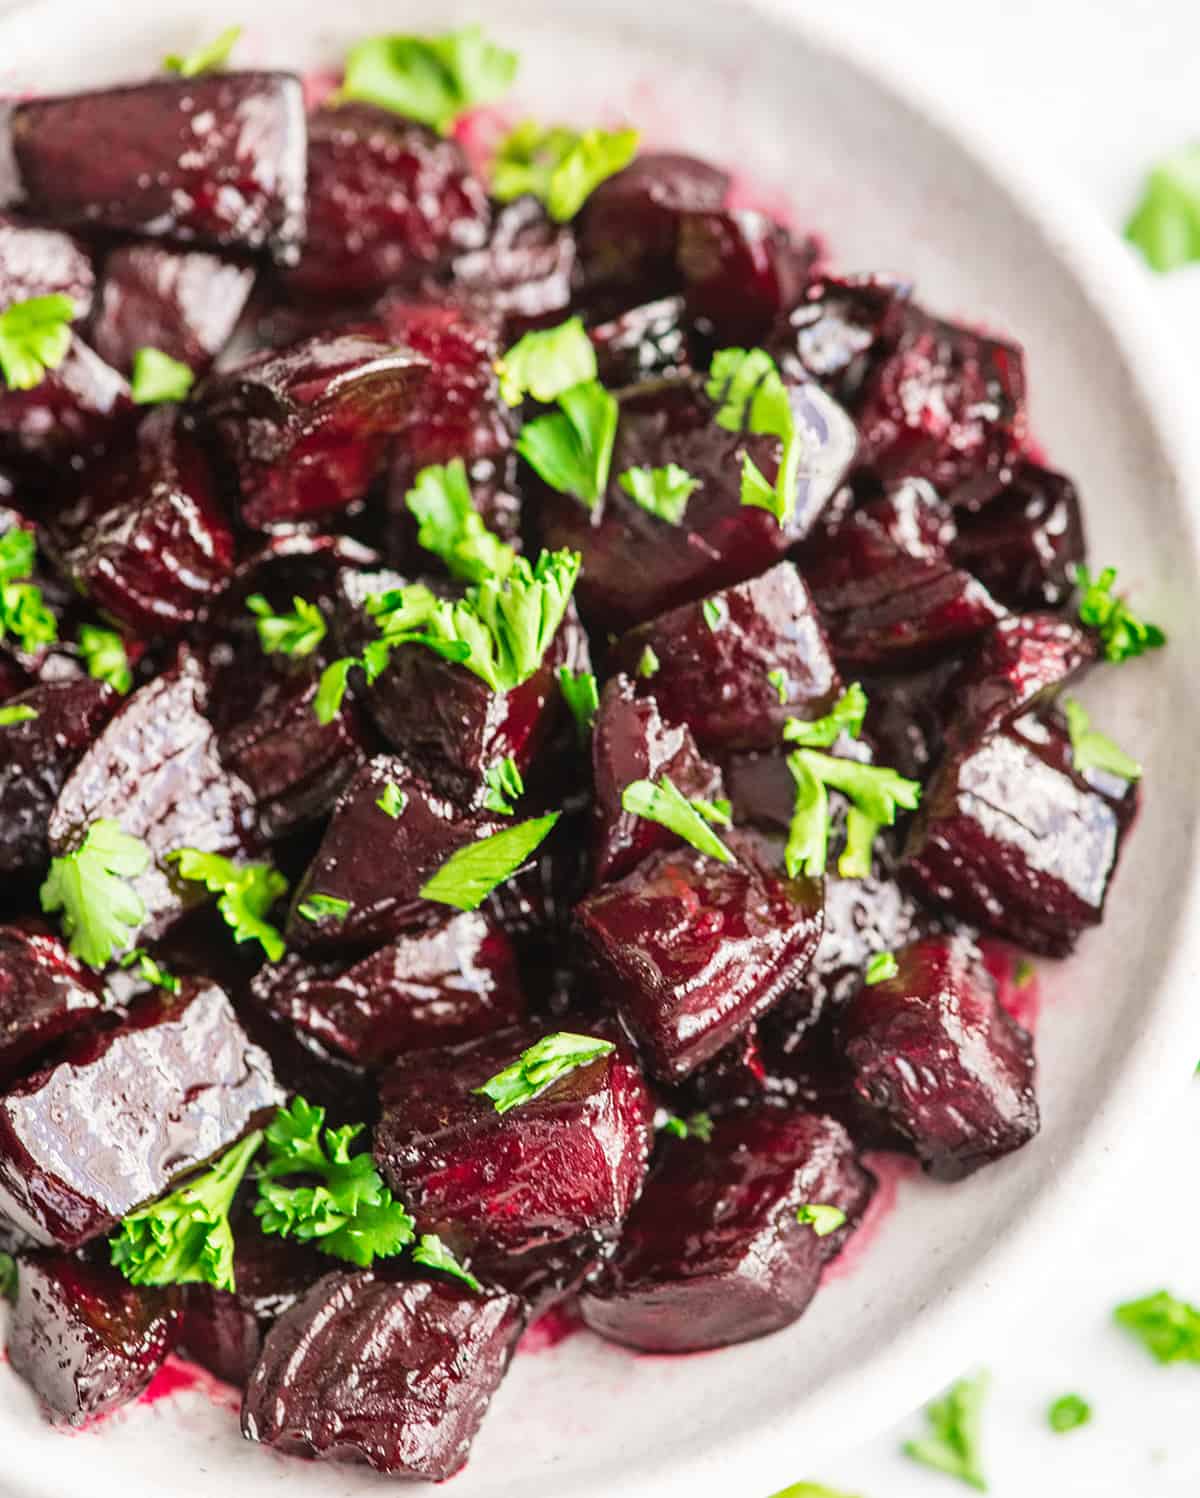 Overhead view of a bowl of balsamic roasted beets garnished with beet greens